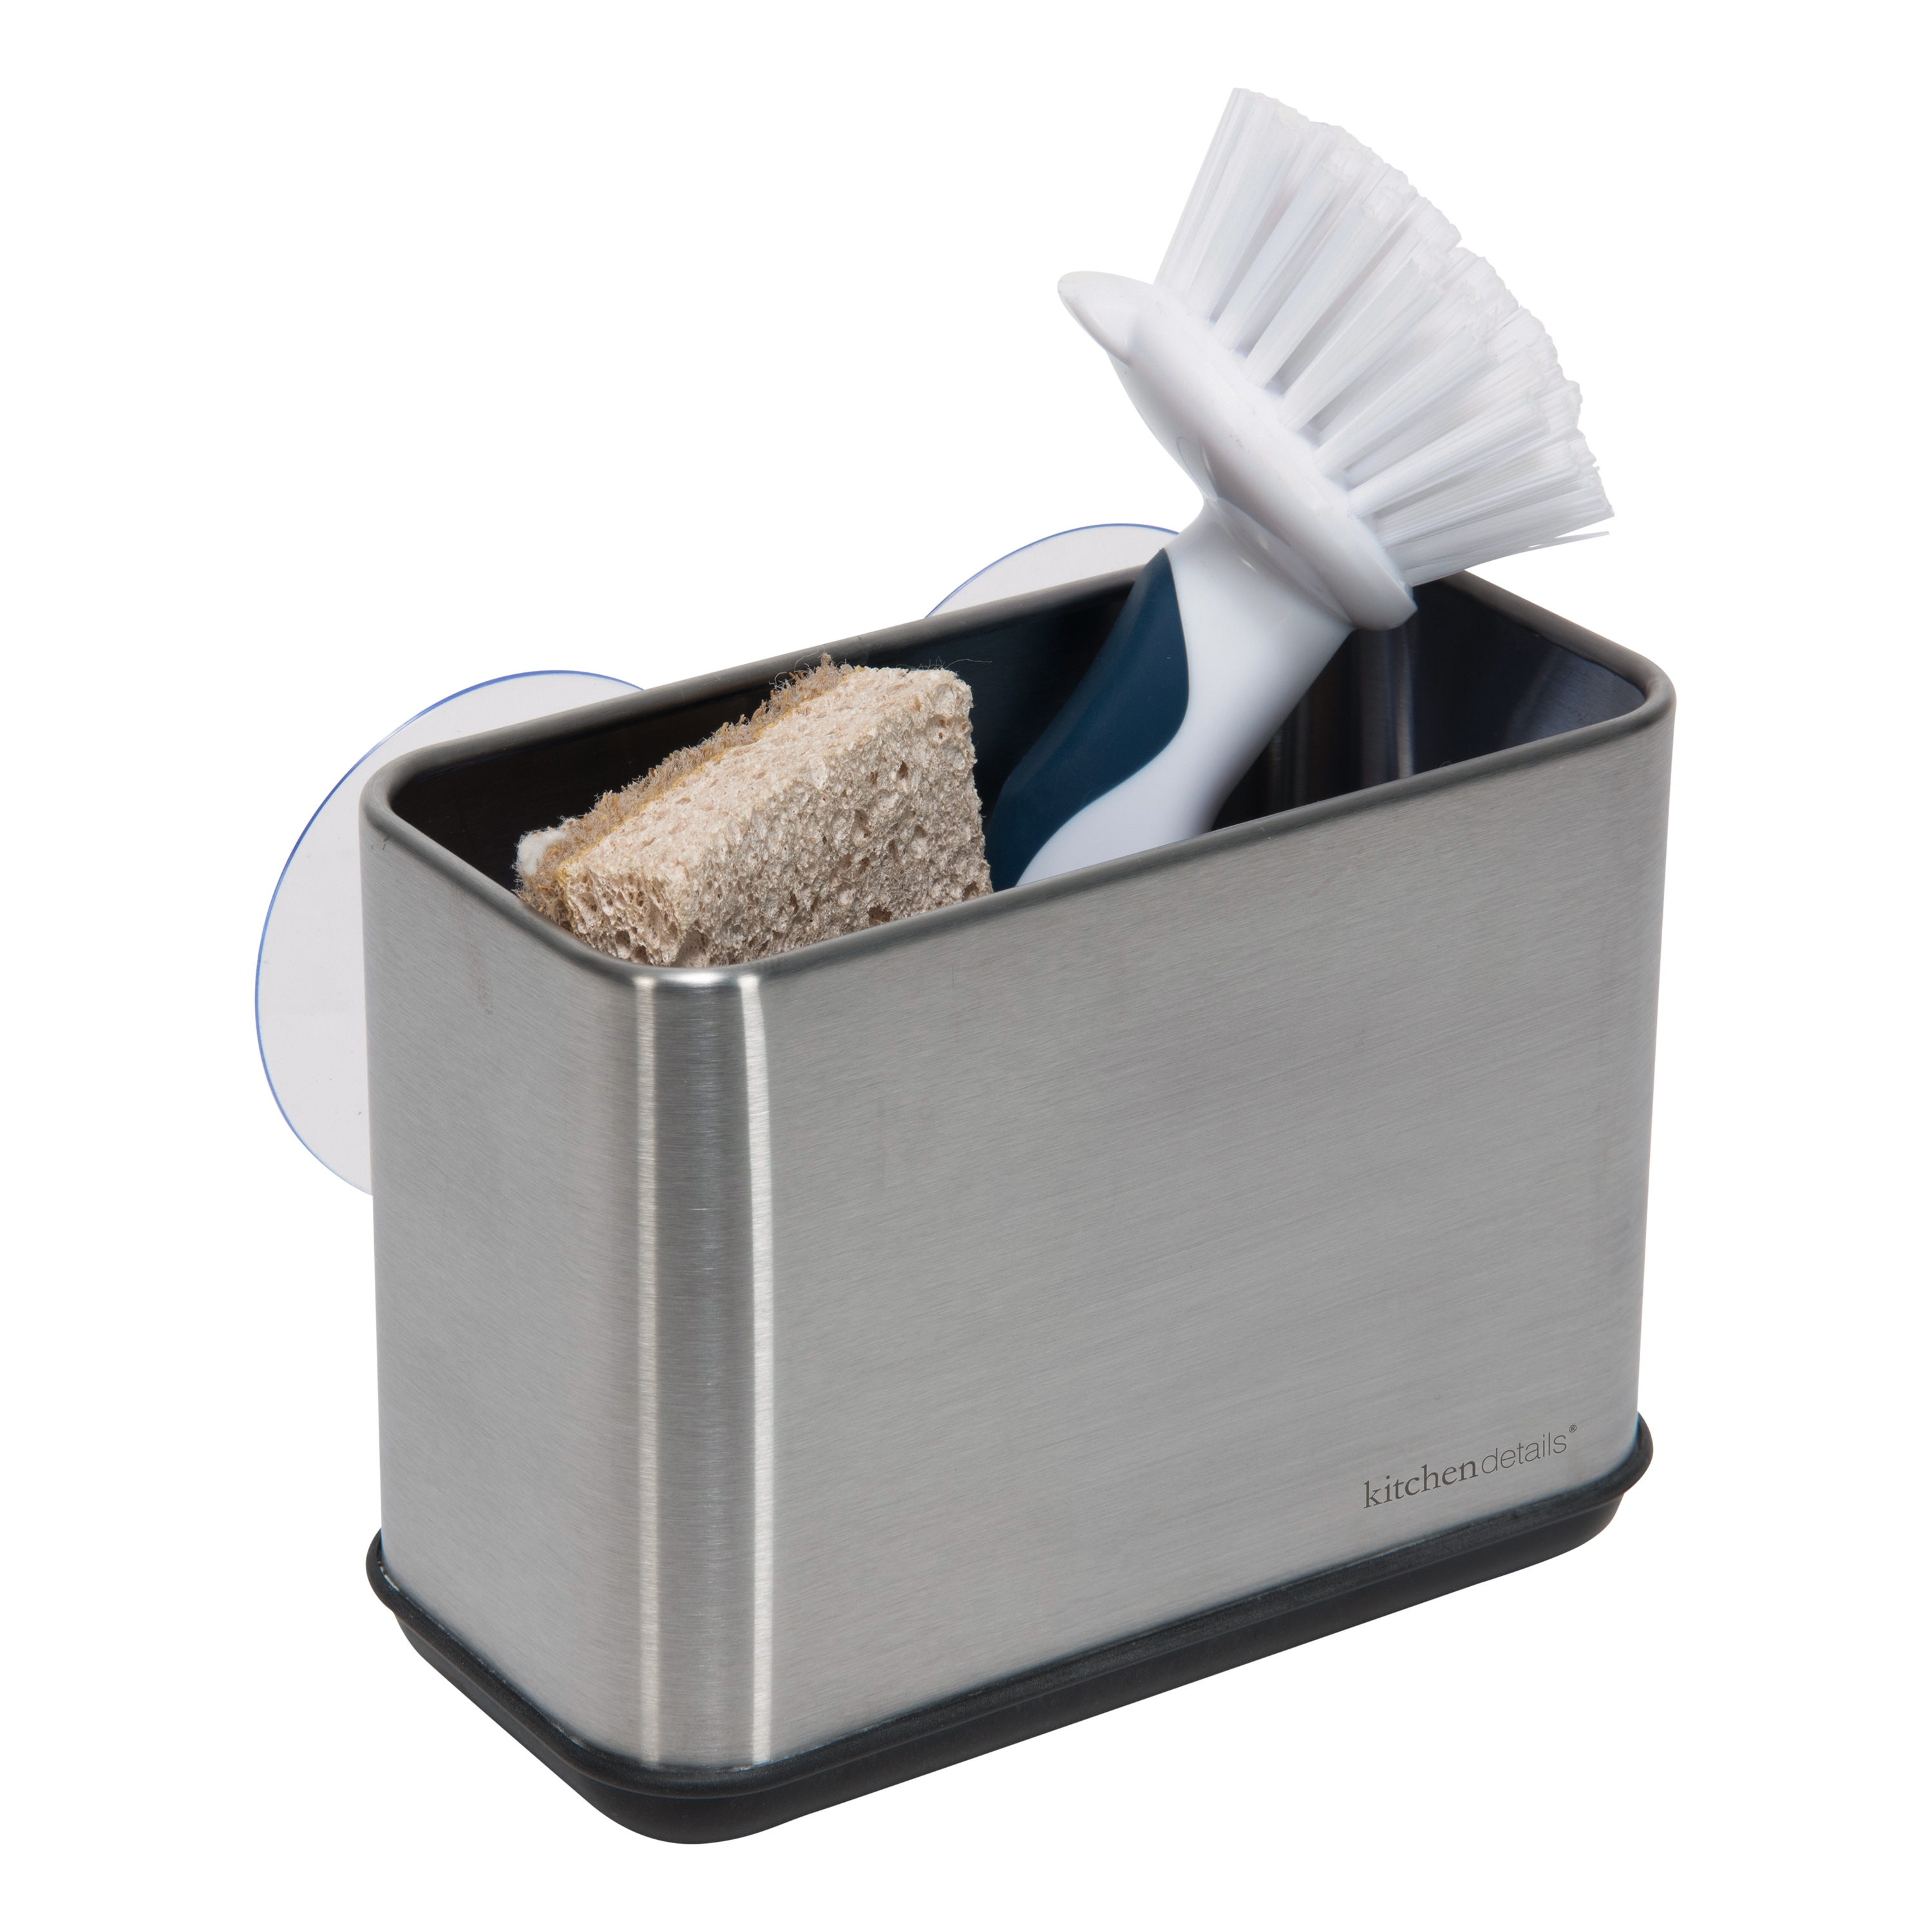  OXO Stainless Steel Good Grips Sinkware Caddy, One Size & Good  Grips Dish Brush : Home & Kitchen